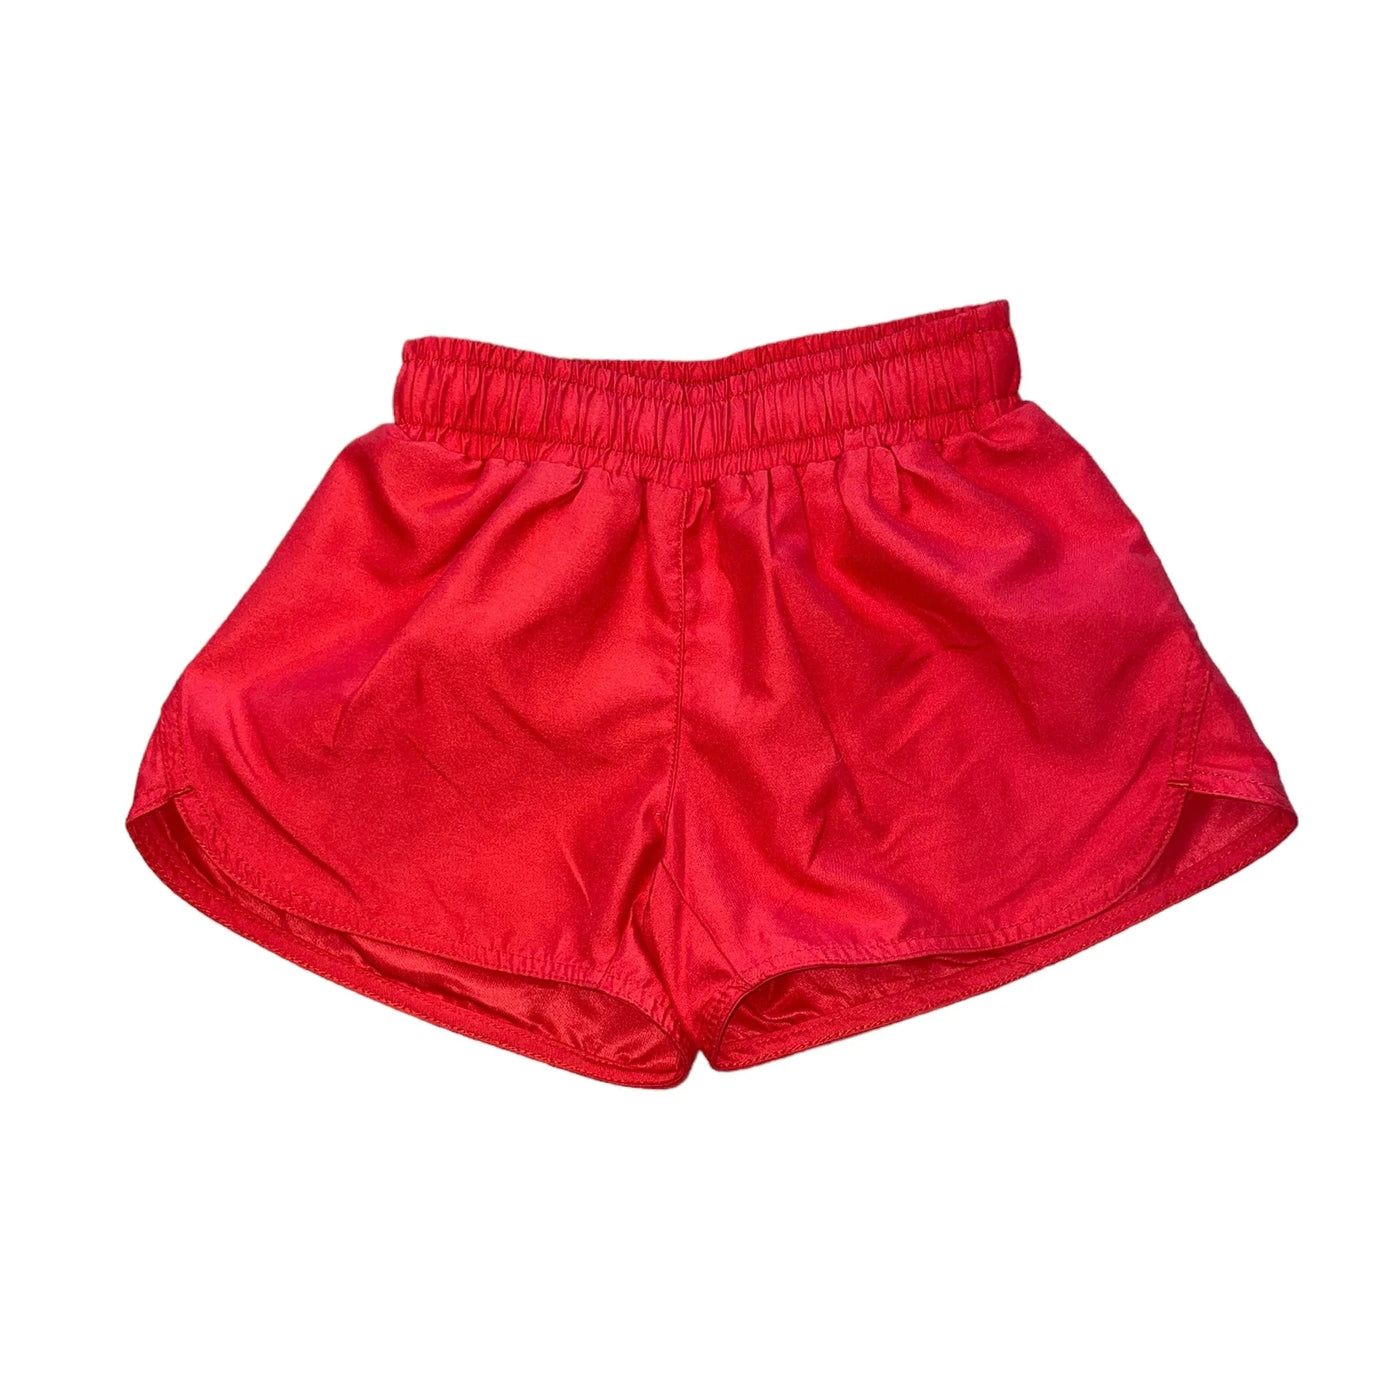 Athleisure Shorts (3 options- Red, Flower Power, and Hearts)